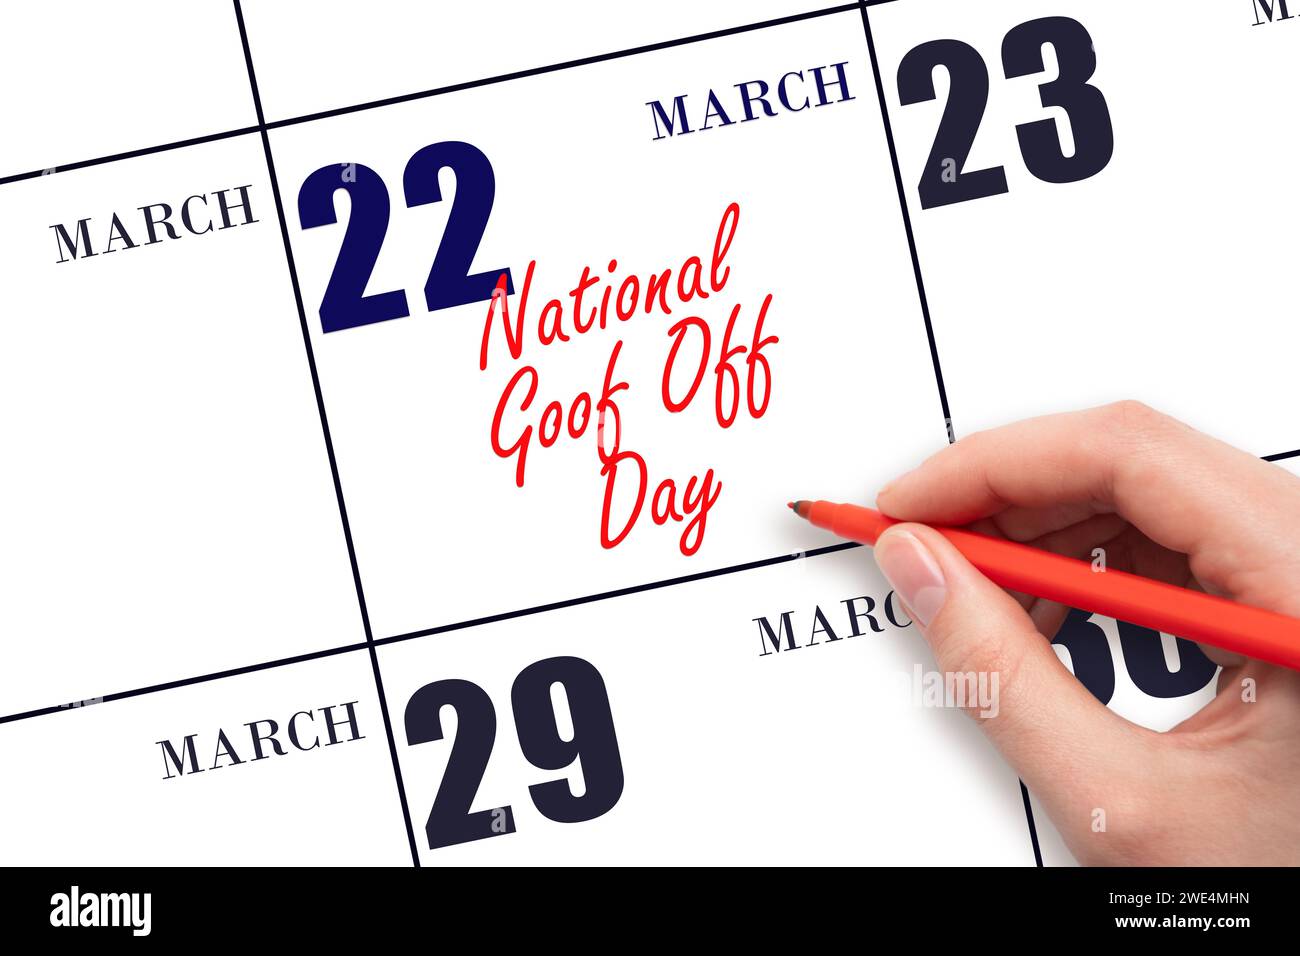 March 22. Hand writing text National Goof Off Day on calendar date. Save the date. Holiday.  Day of the year concept. Stock Photo